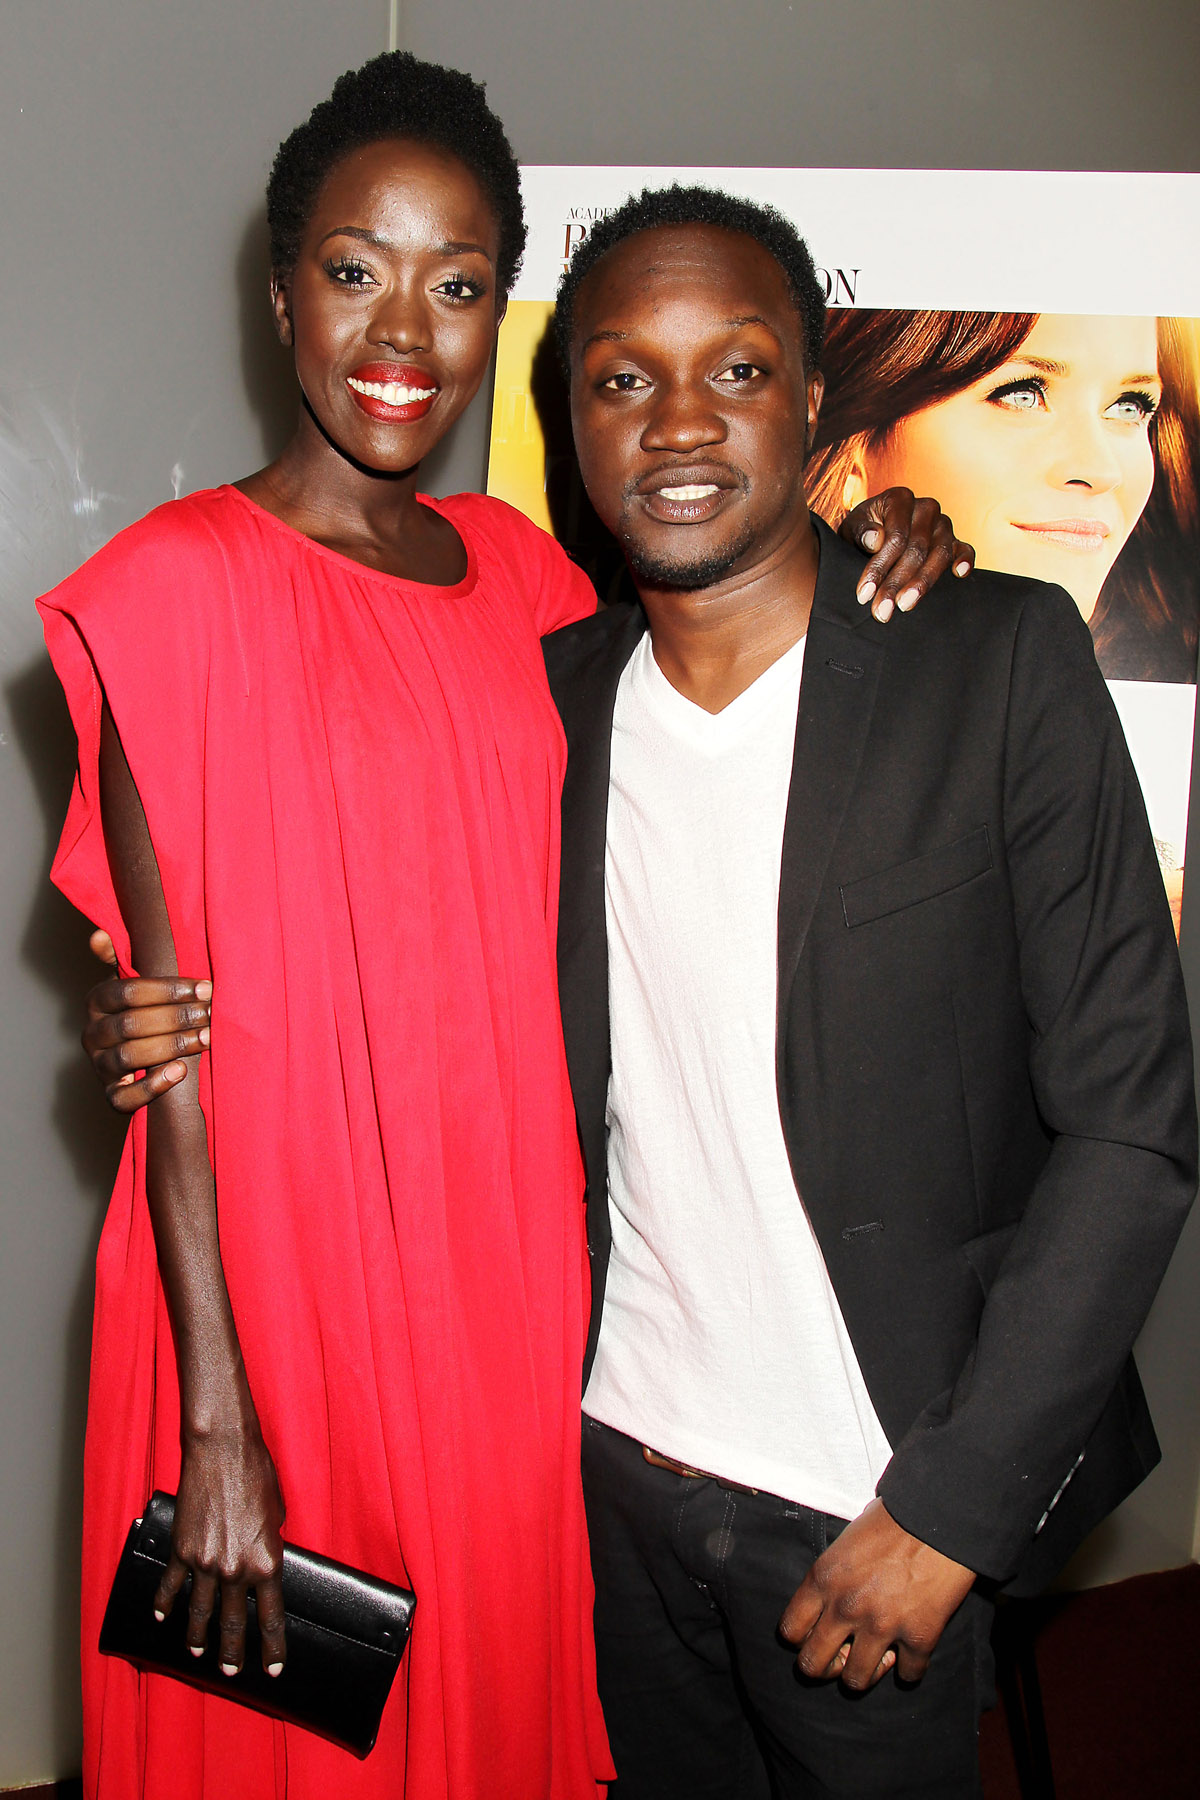 Kuoth Wiel and Arnold Oceng at The Good Lie screening in New York, on behalf of UNICEF.